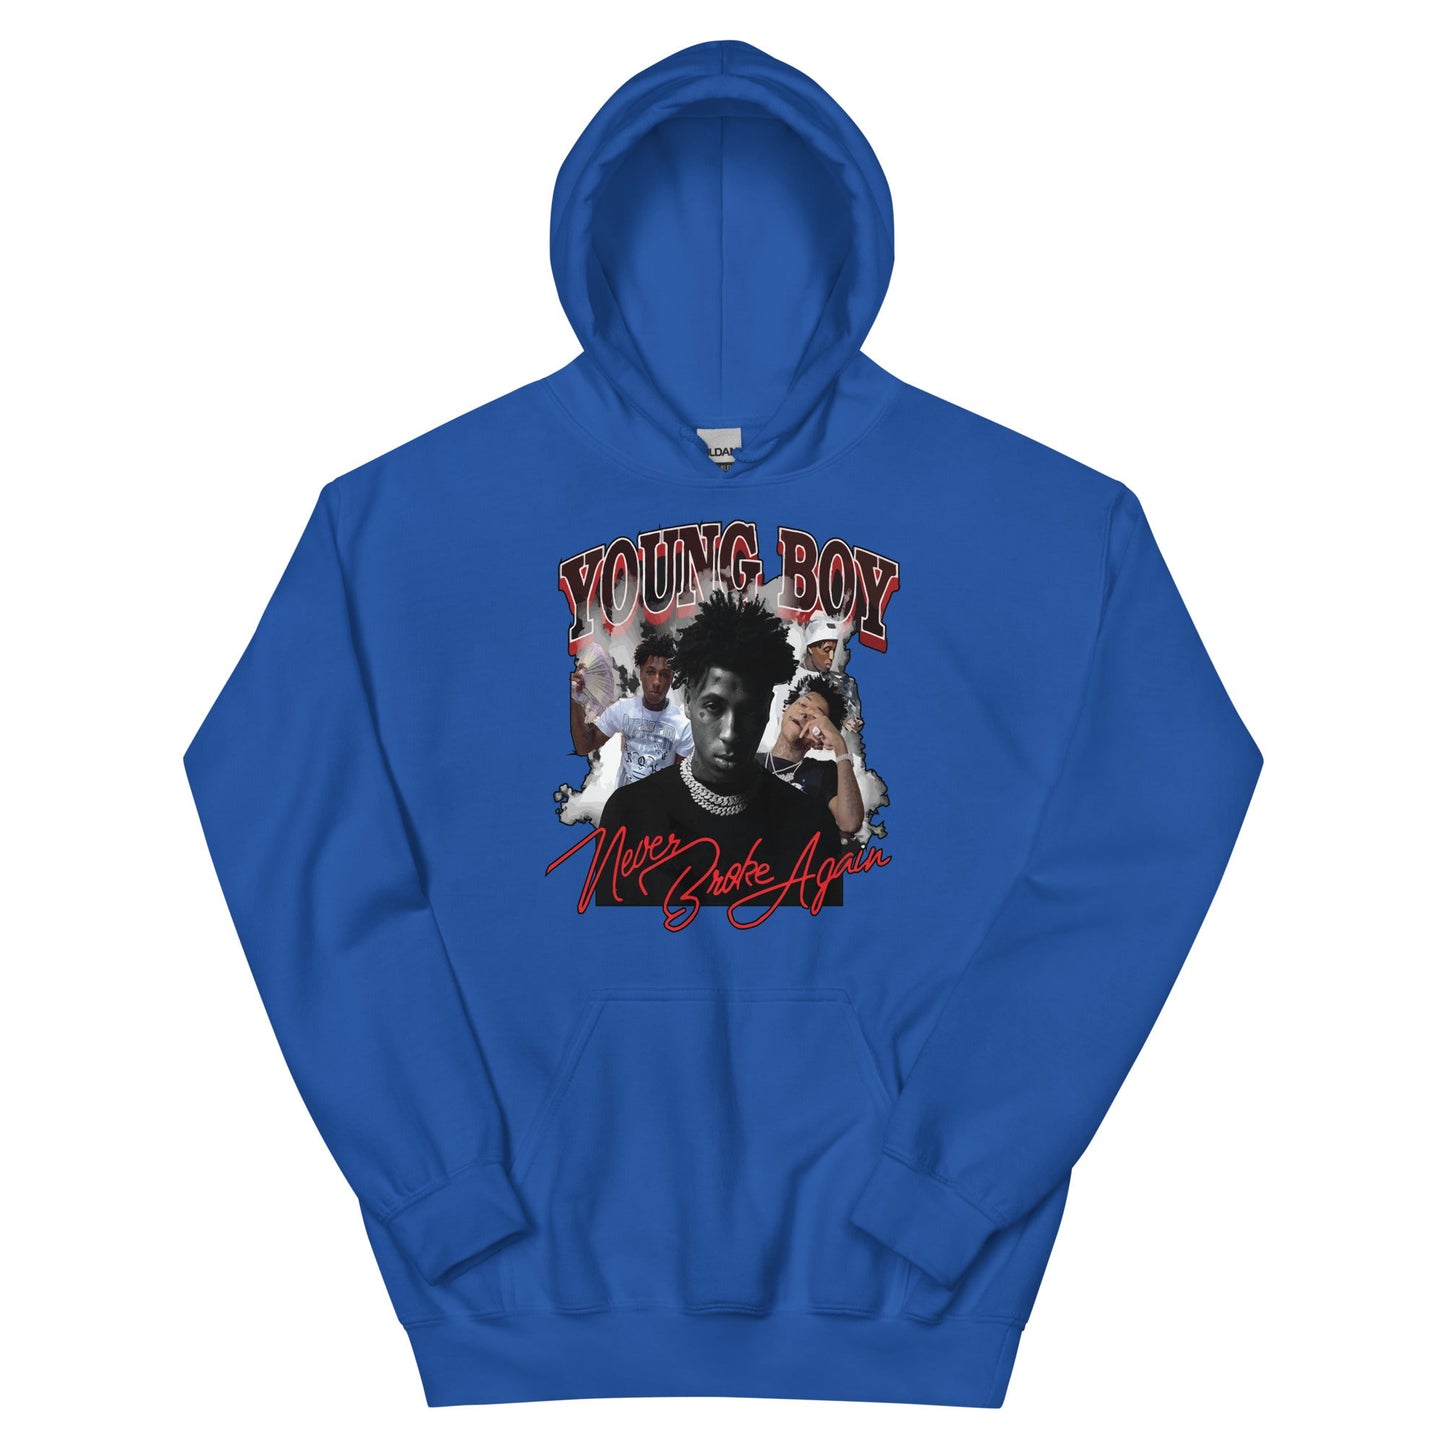 youngboy never broke again hoodie - The Truth Graphics